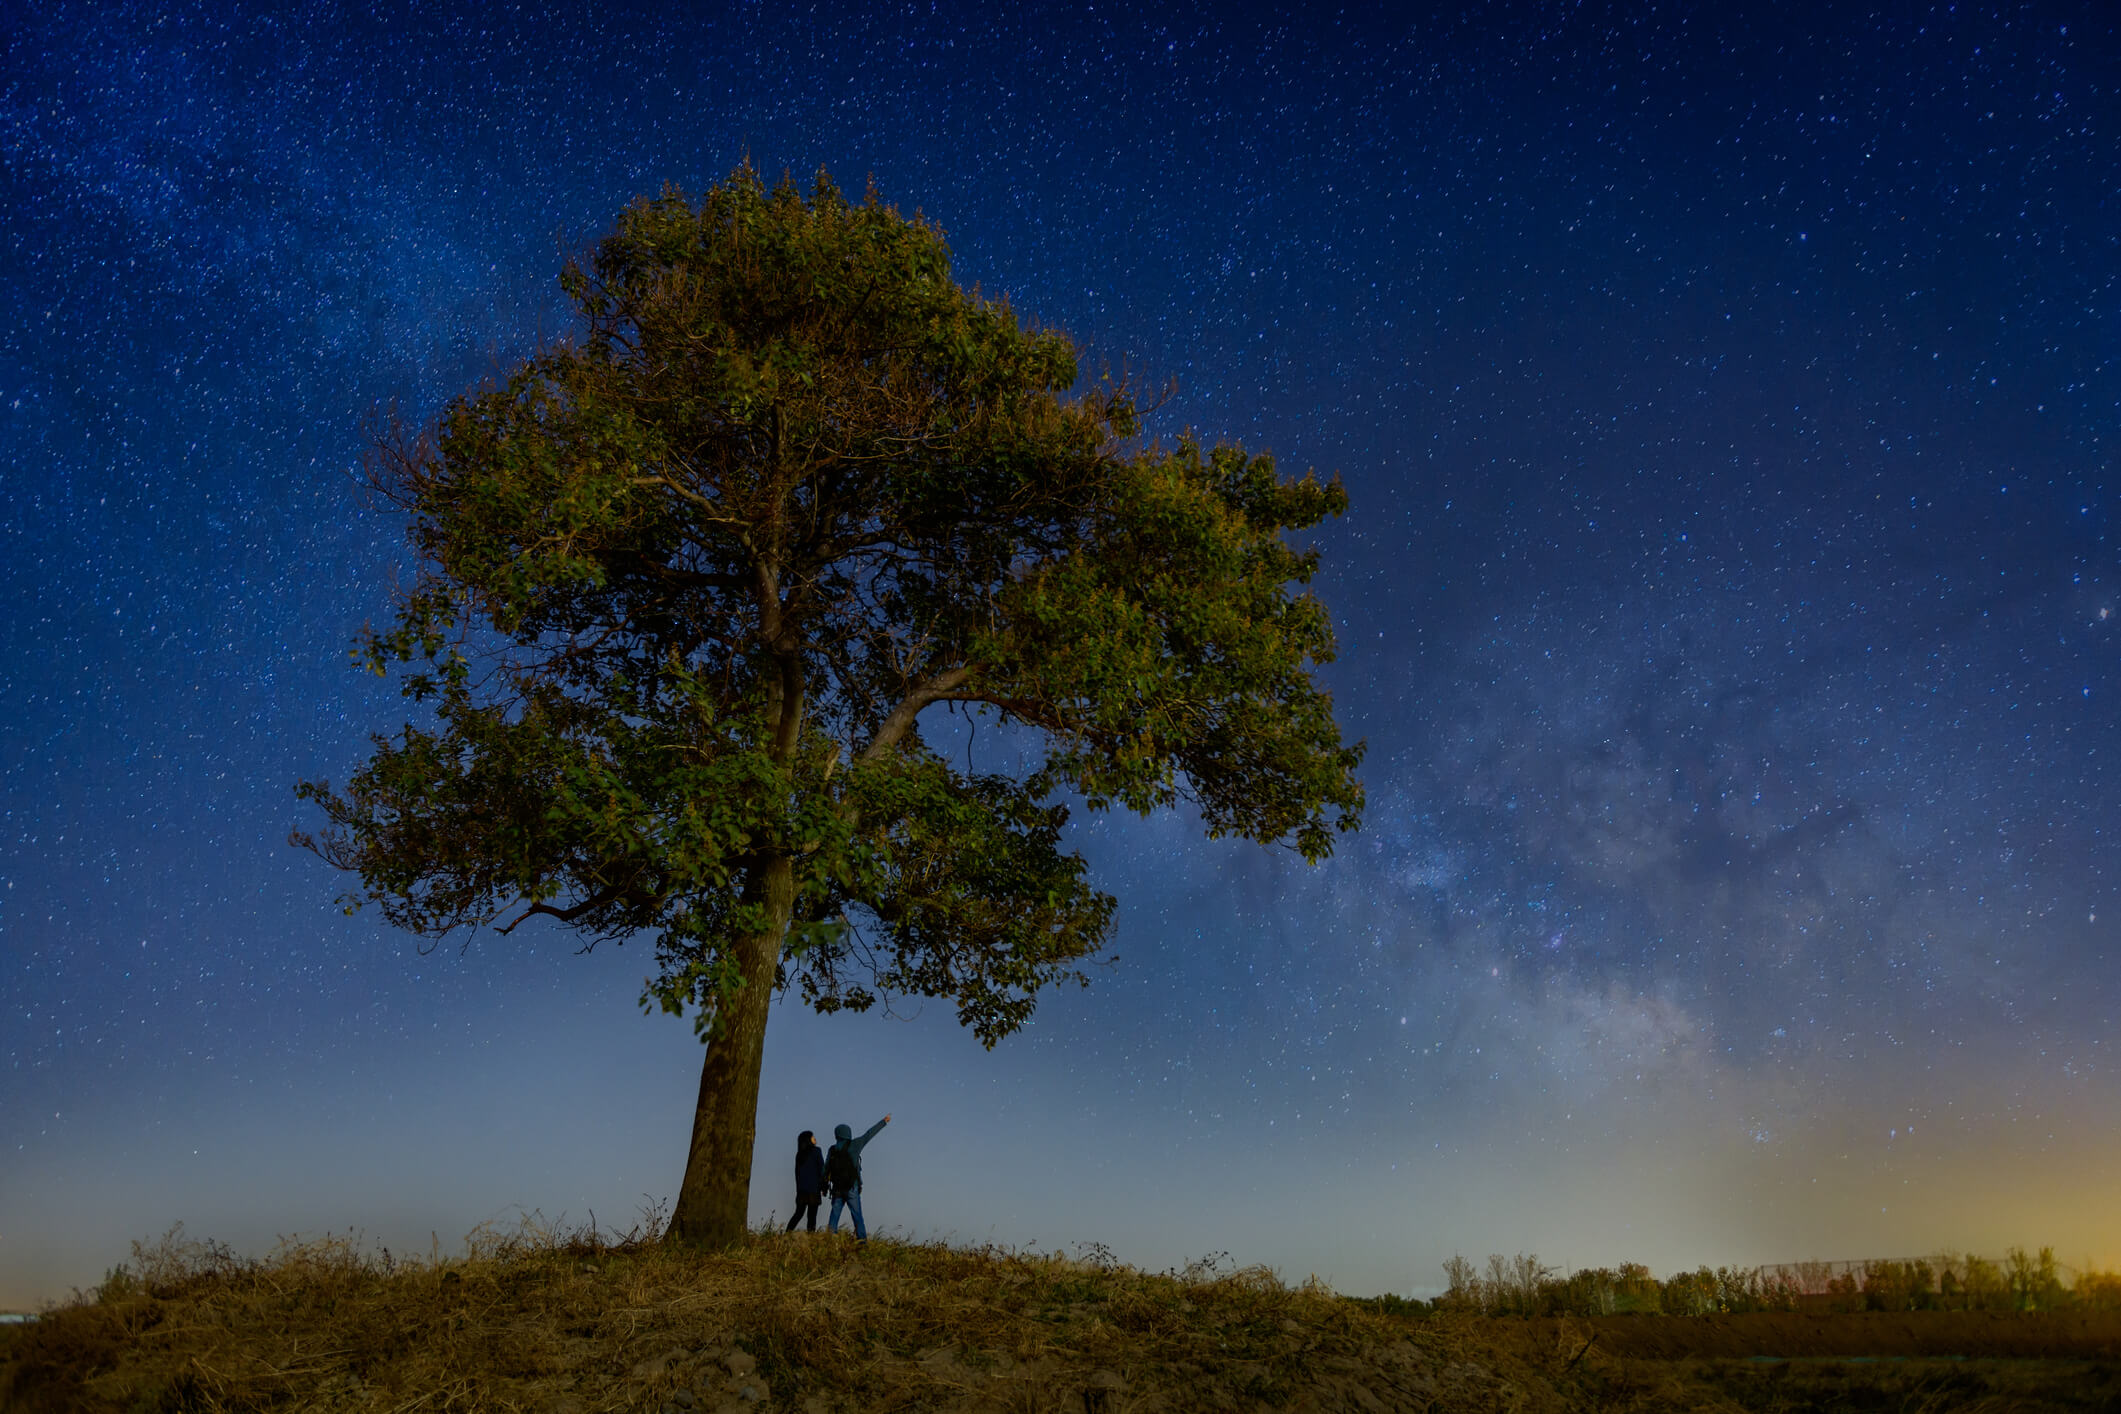 Couple under a tree stargazing at the night sky